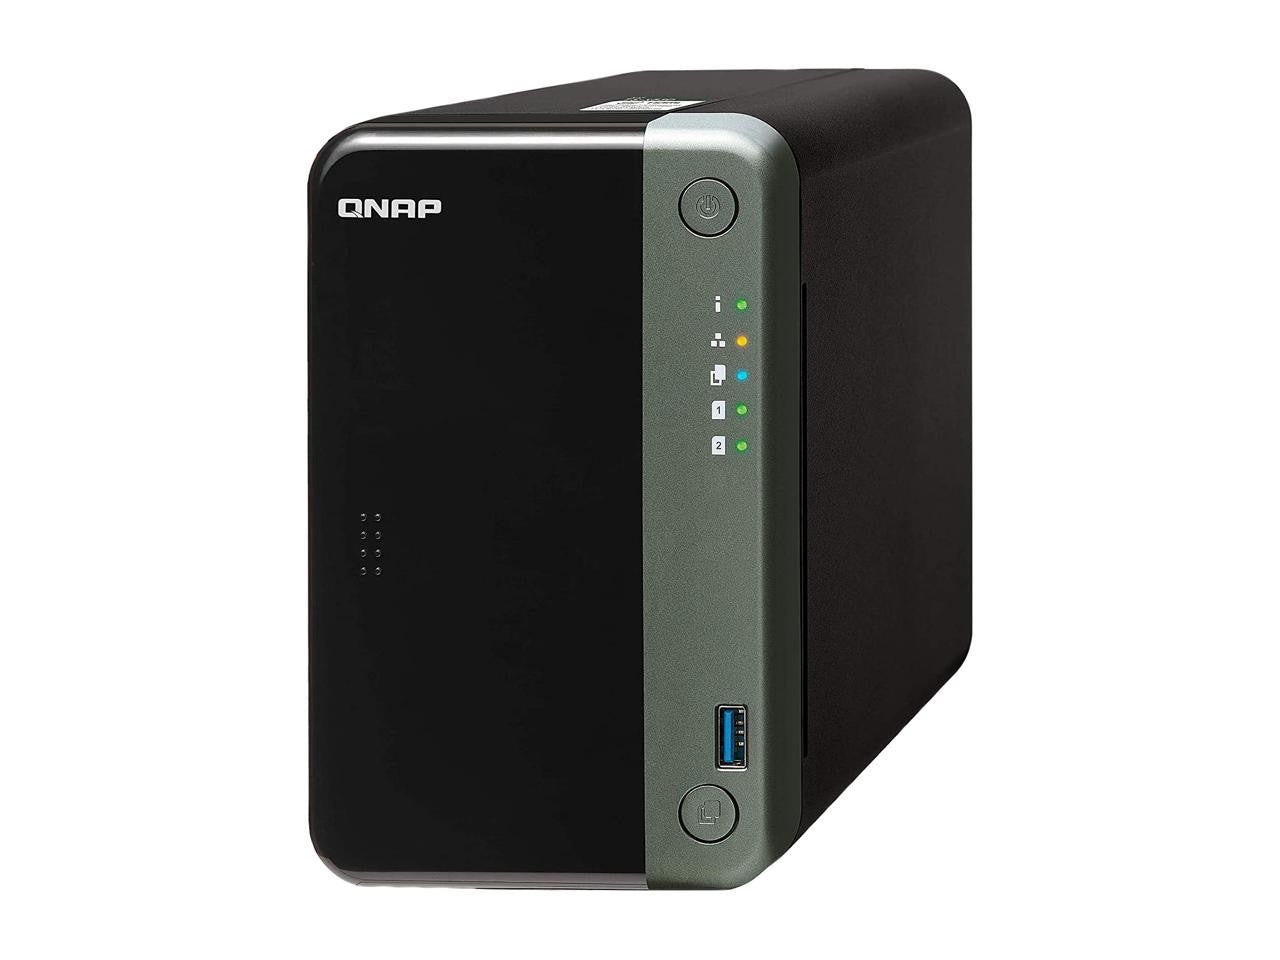 QNAP TS-253D Quad Core 2.7Ghz 2-Bay NAS with 4GB RAM and 4TB (2 x 2TB) of Seagate Ironwolf NAS Drives Fully Assembled and Tested By CustomTechSales